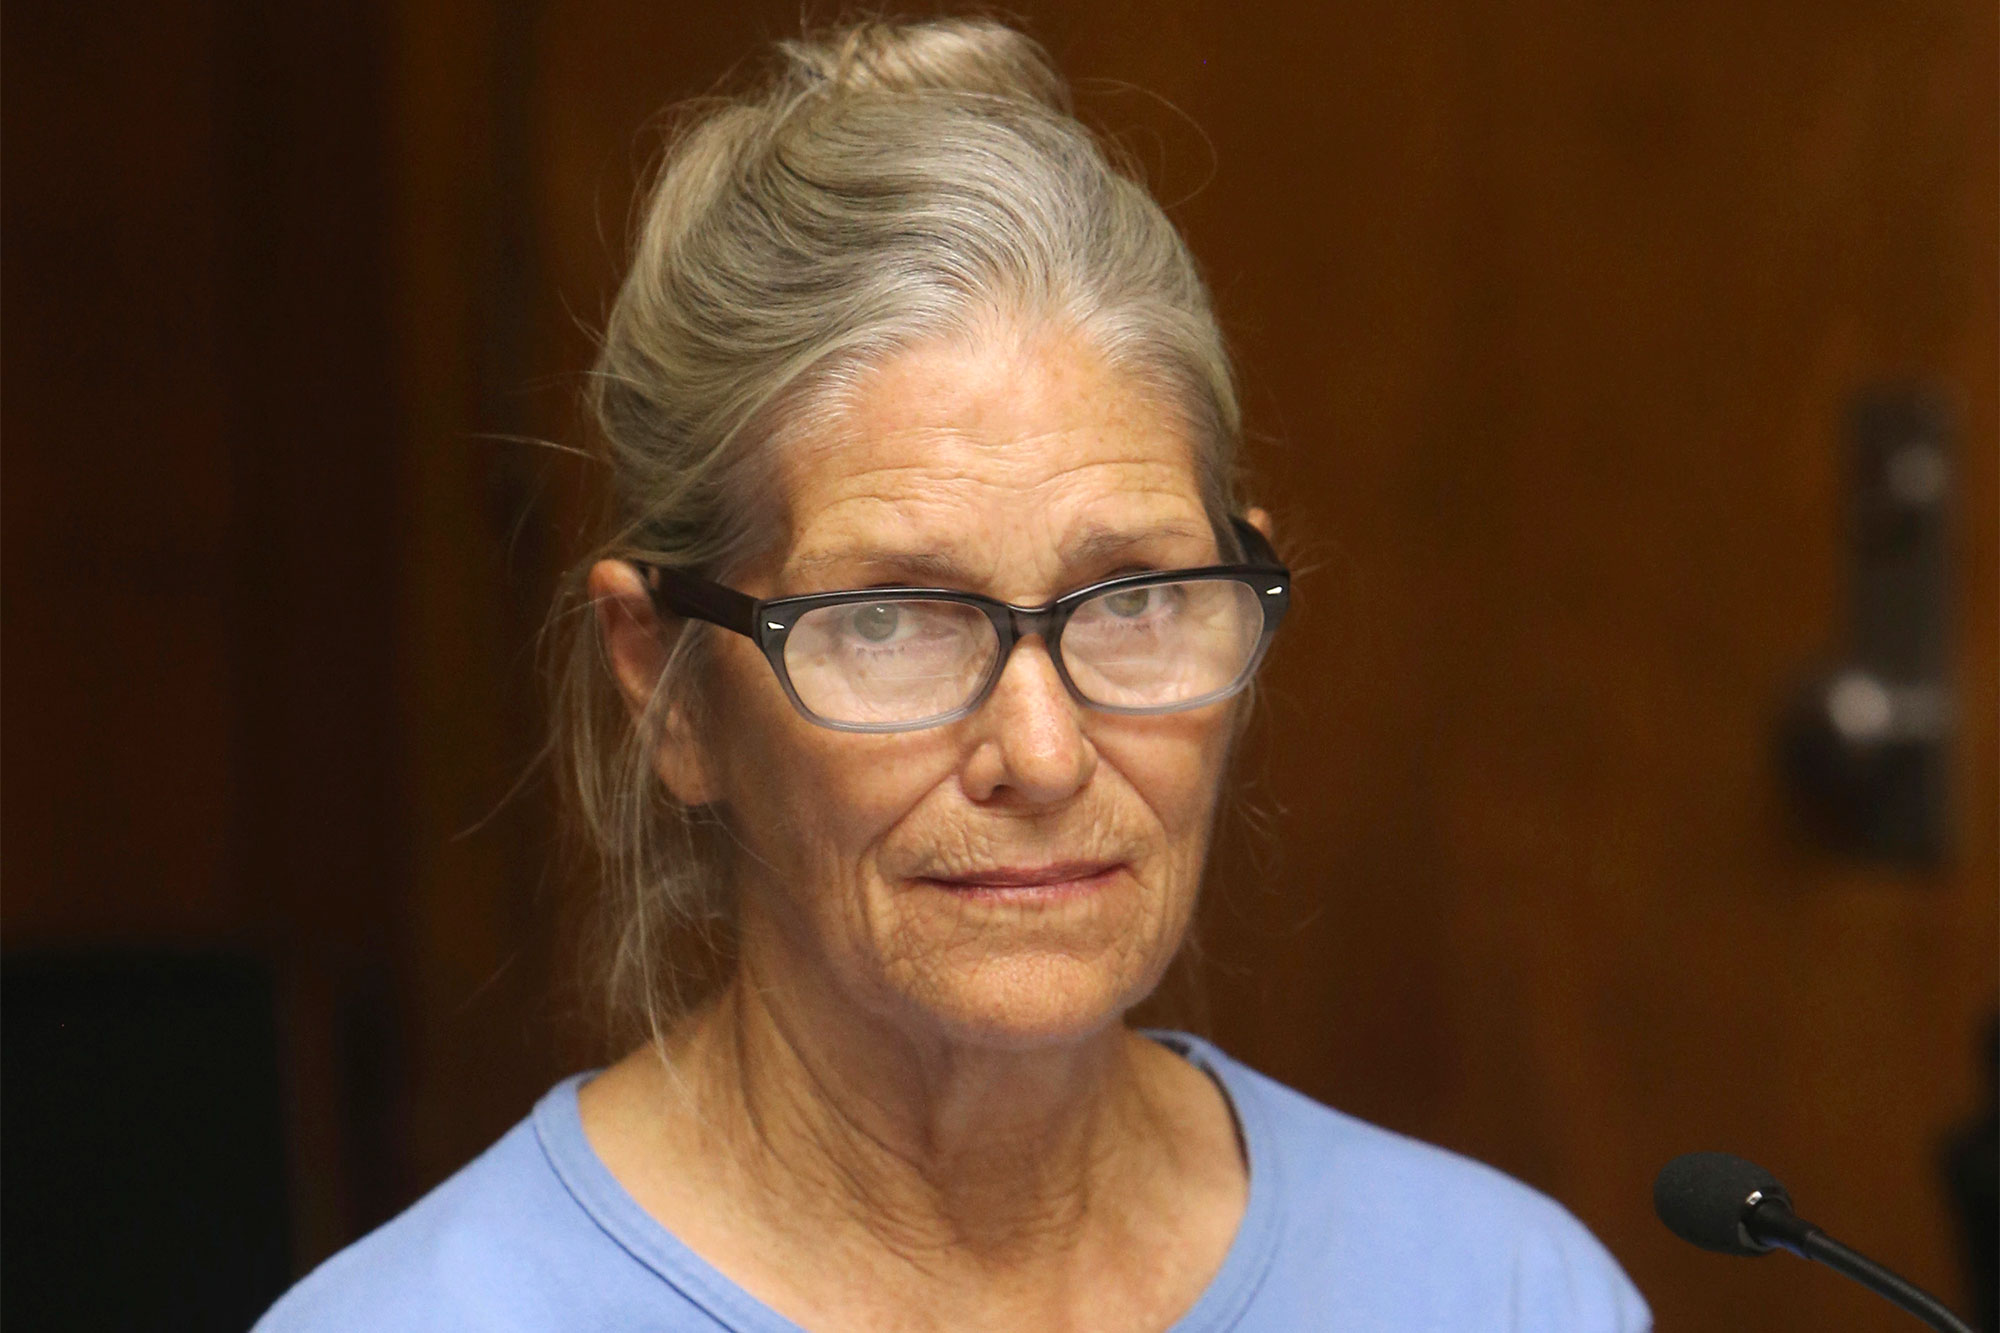 Parole board recommends liberate for Manson follower Leslie Van Houten for fifth time